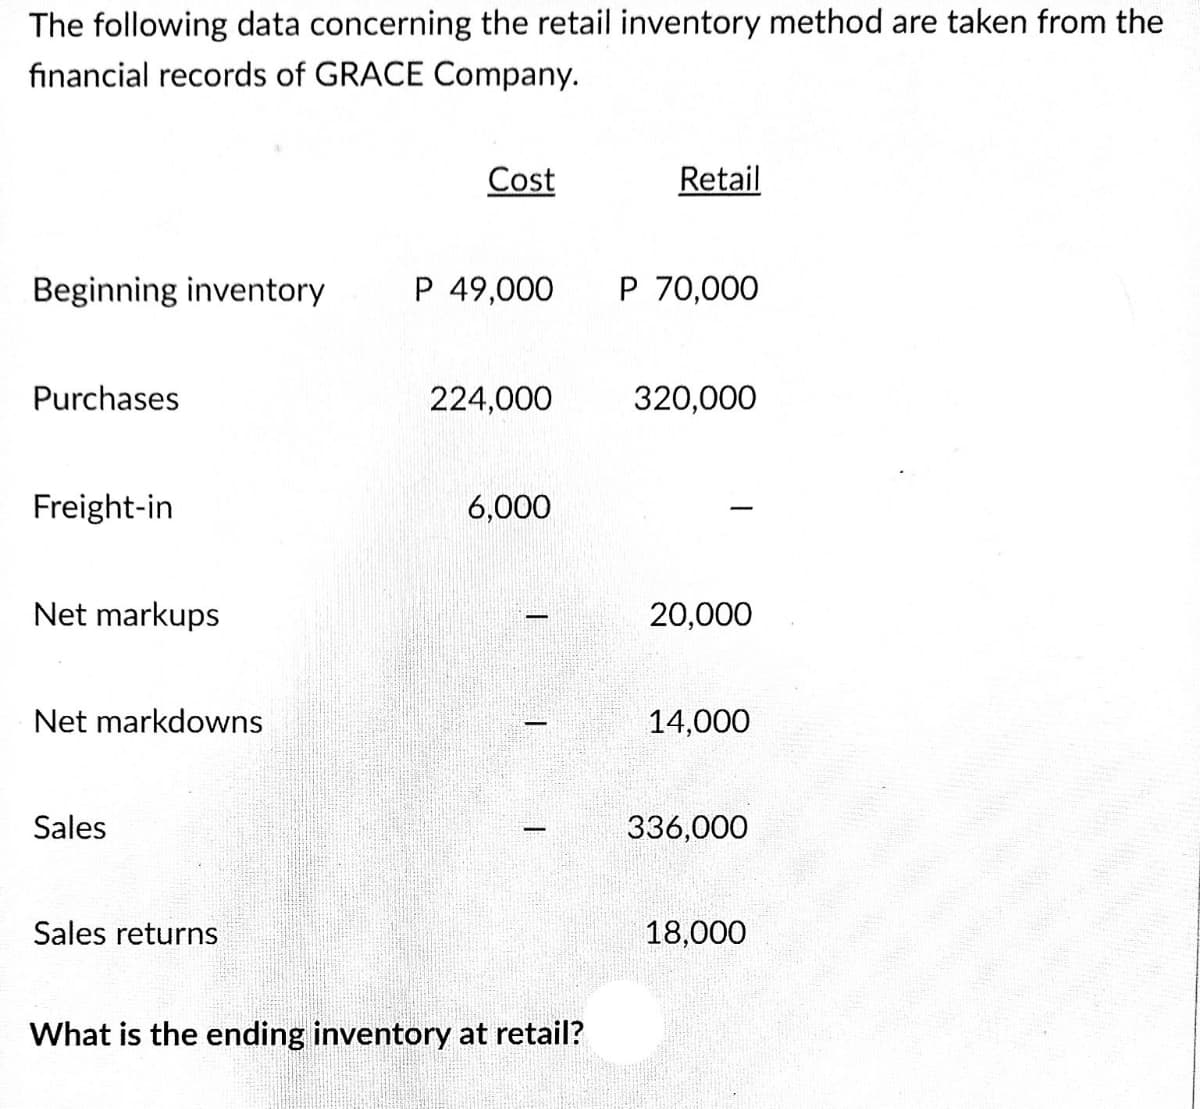 The following data concerning the retail inventory method are taken from the
financial records of GRACE Company.
Cost
Retail
Beginning inventory
P 49,000
P 70,000
Purchases
224,000
320,000
Freight-in
6,000
Net markups
20,000
Net markdowns
14,000
Sales
336,000
Sales returns
18,000
What is the ending inventory at retail?
